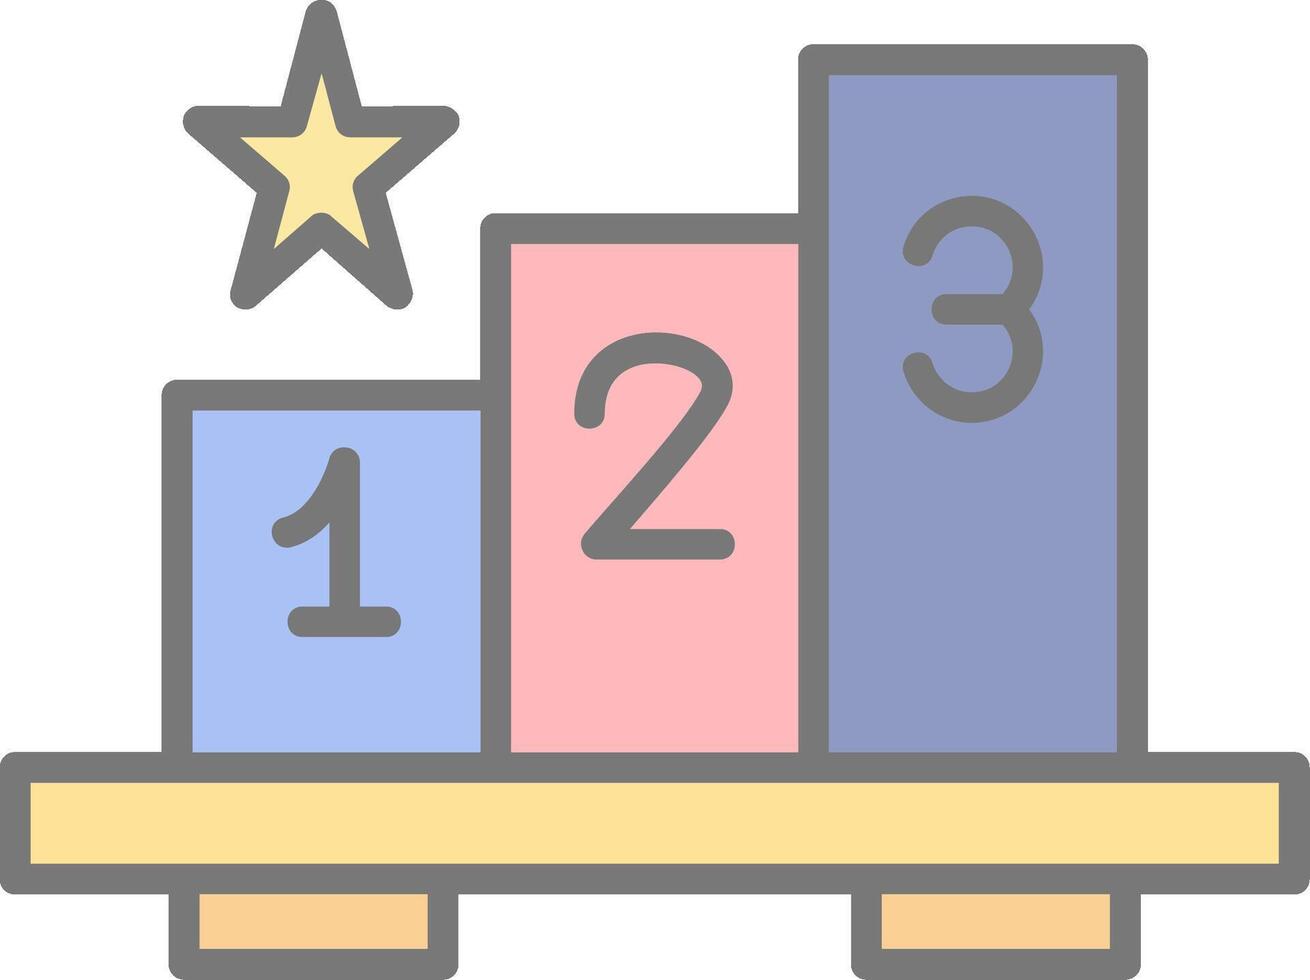 Leaderboard Line Filled Light Icon vector